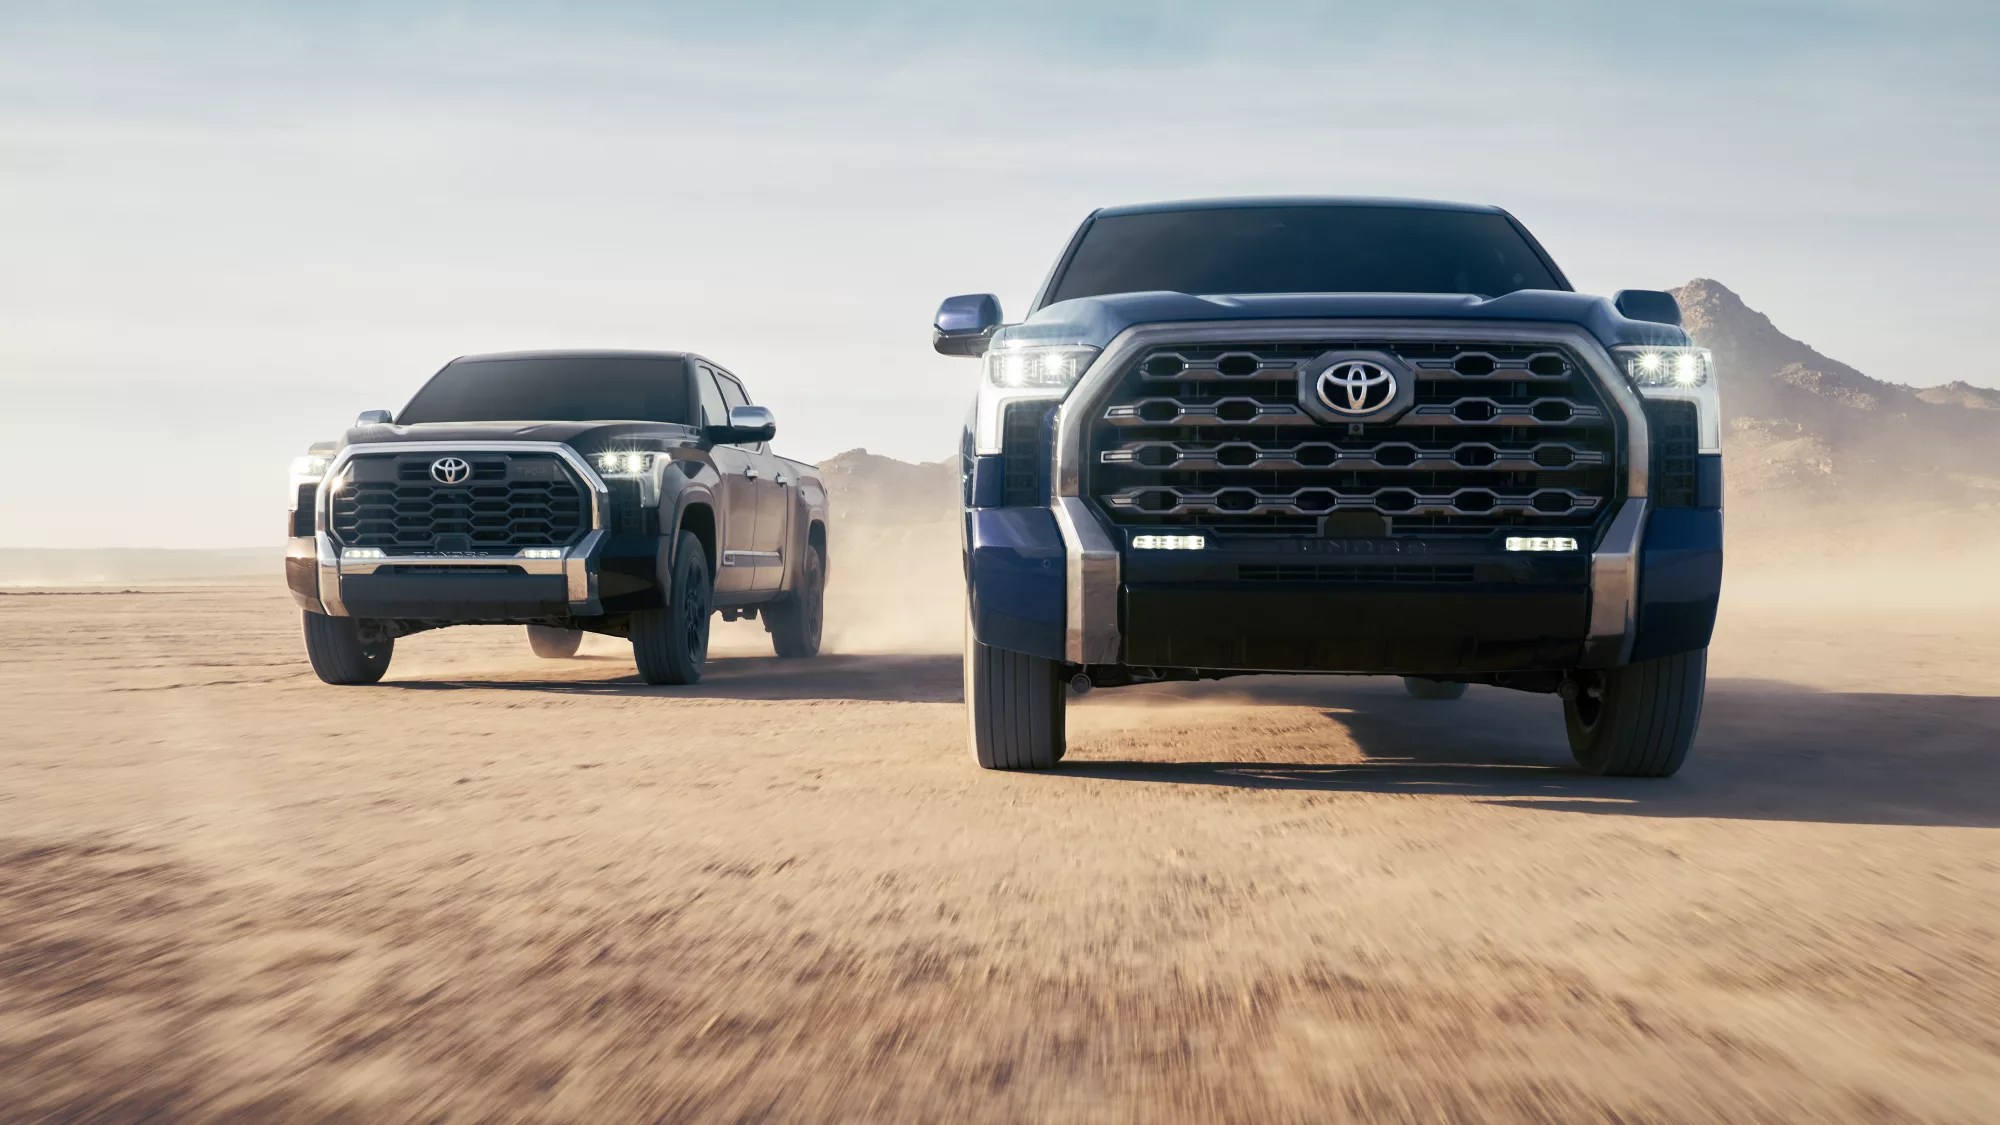 A full-size Toyota truck dominates some rugged terrain.